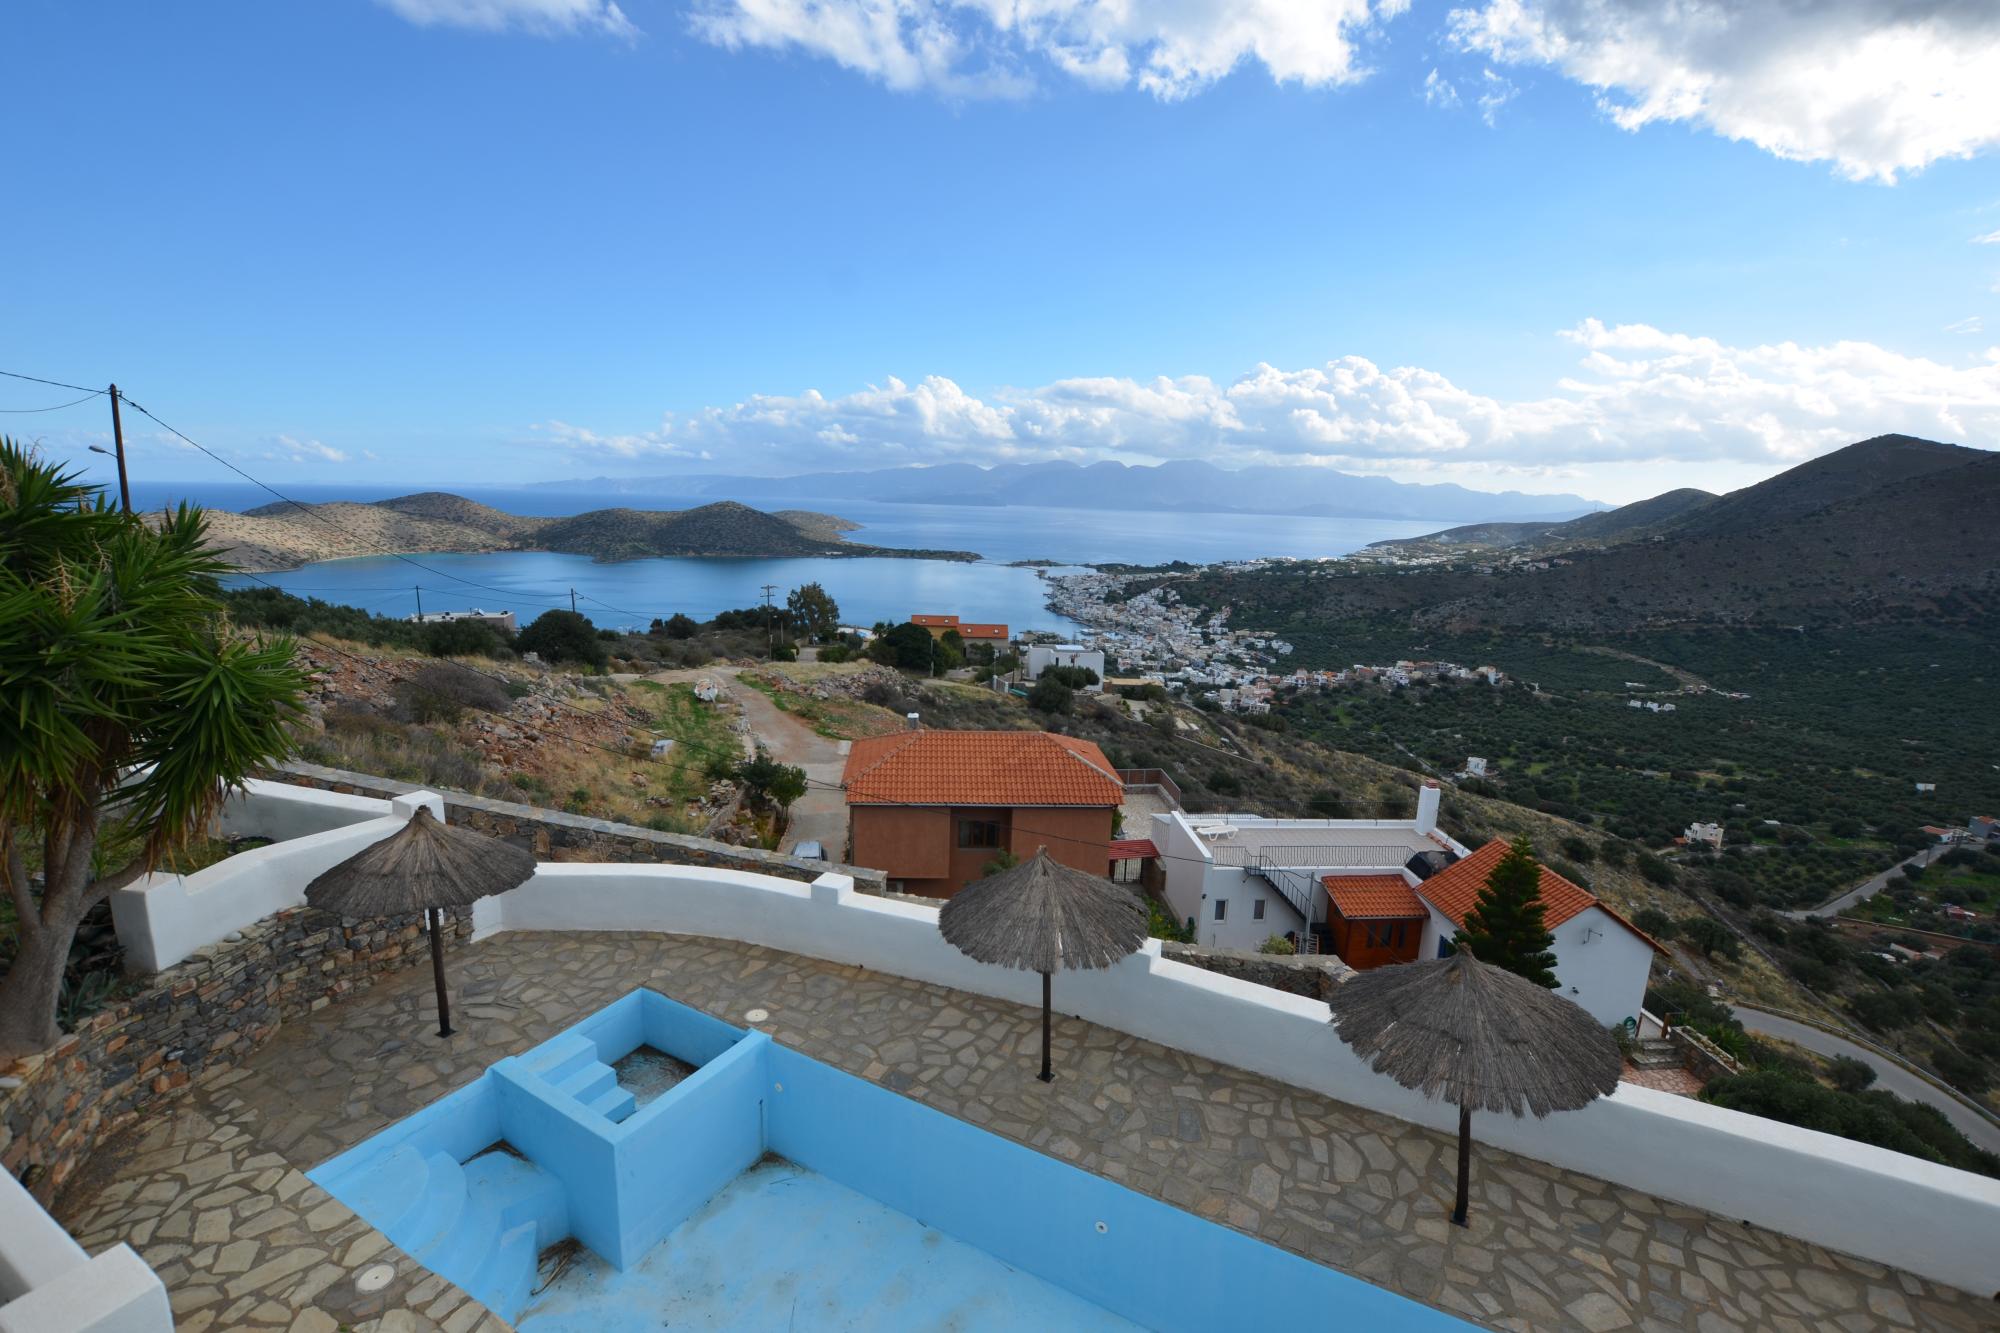 Two villas of 3 bedrooms with pools – Amazing views.